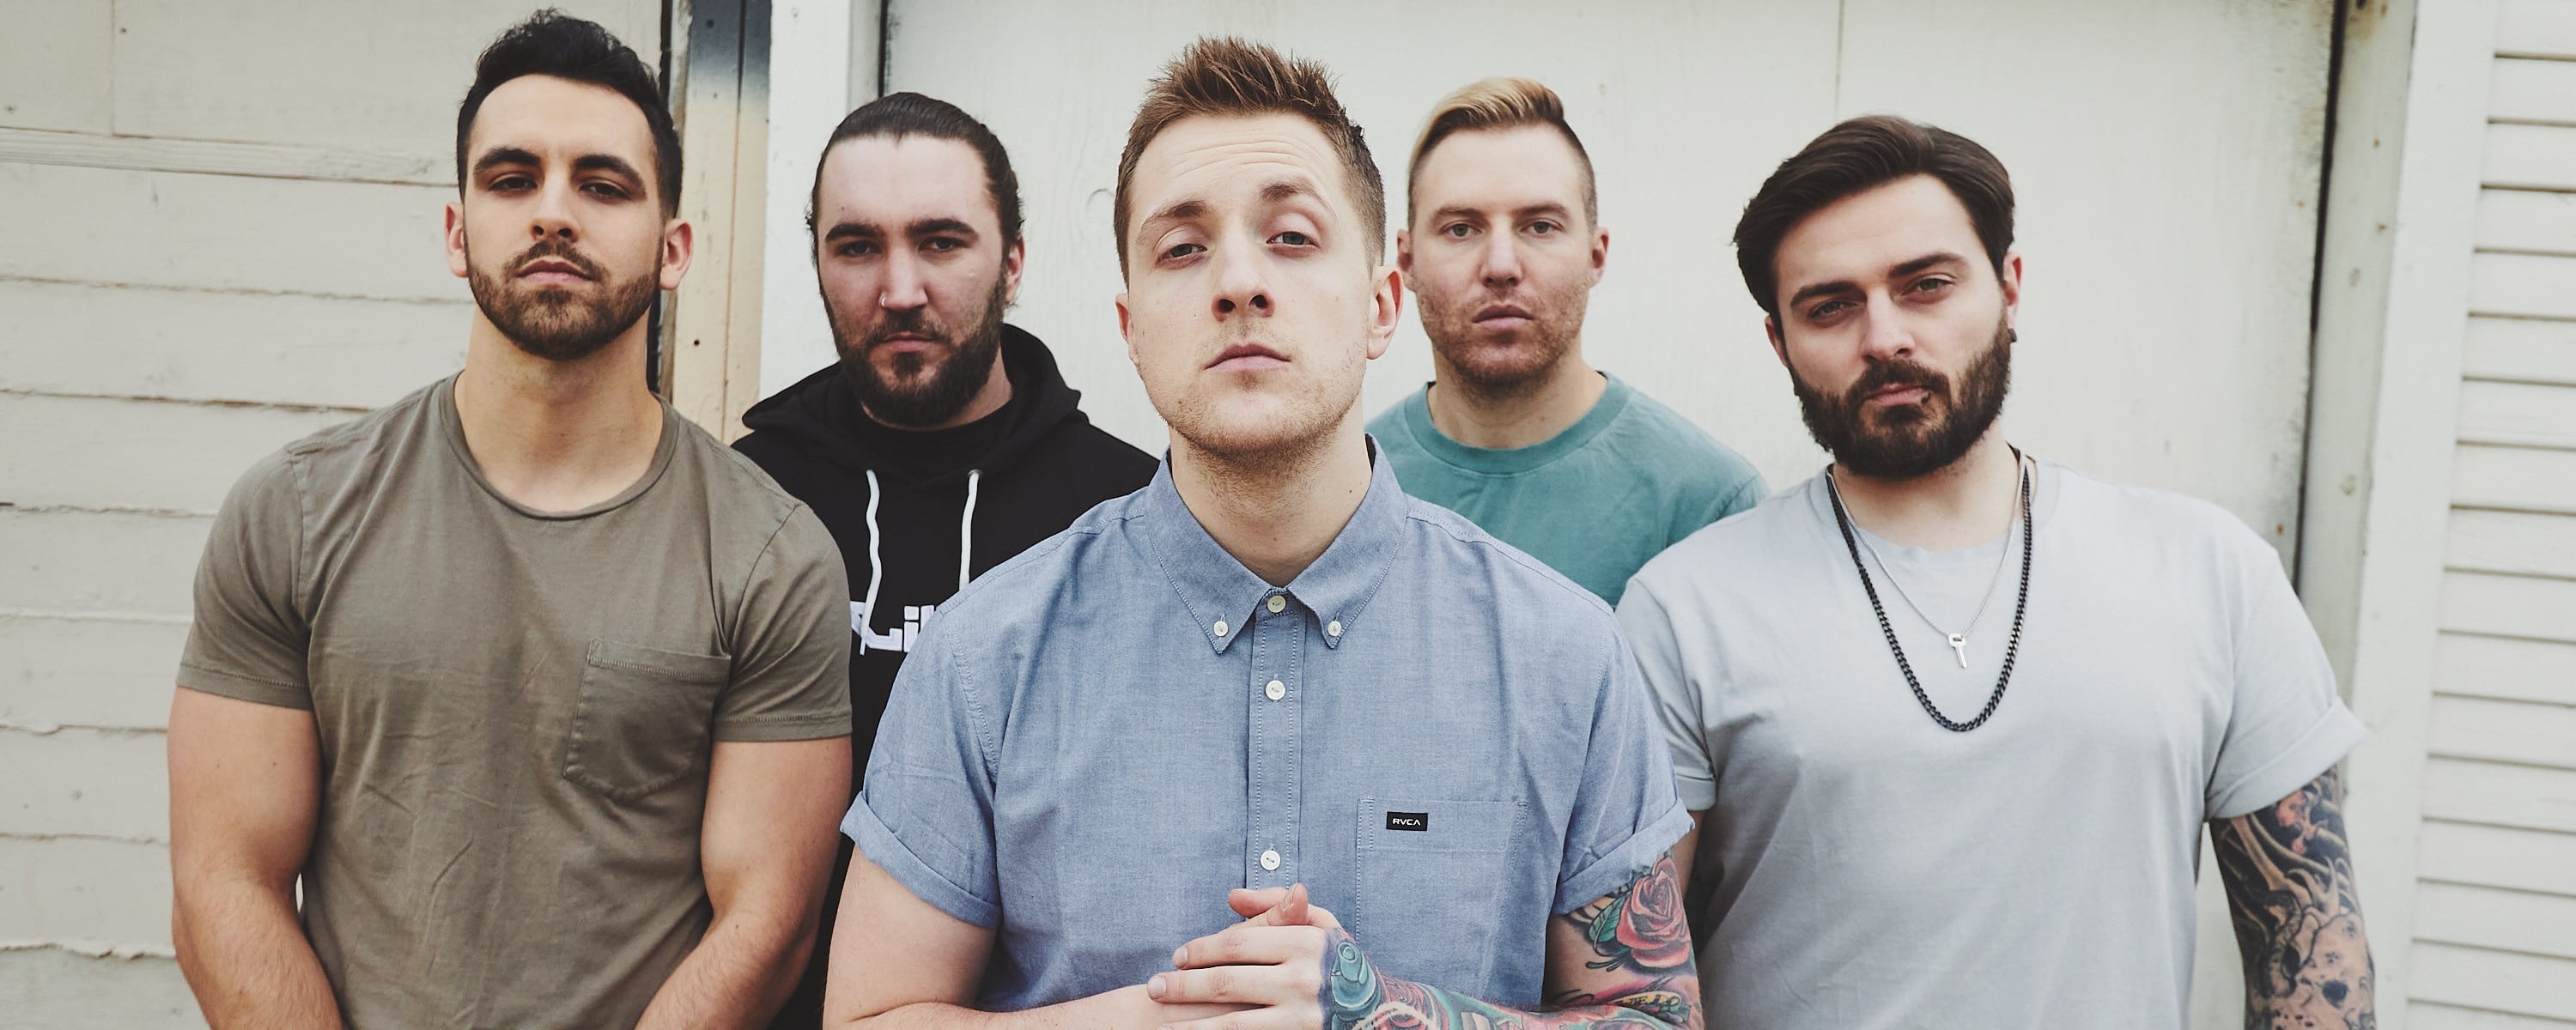 Behind The Song: “Breaking Down” By I Prevail